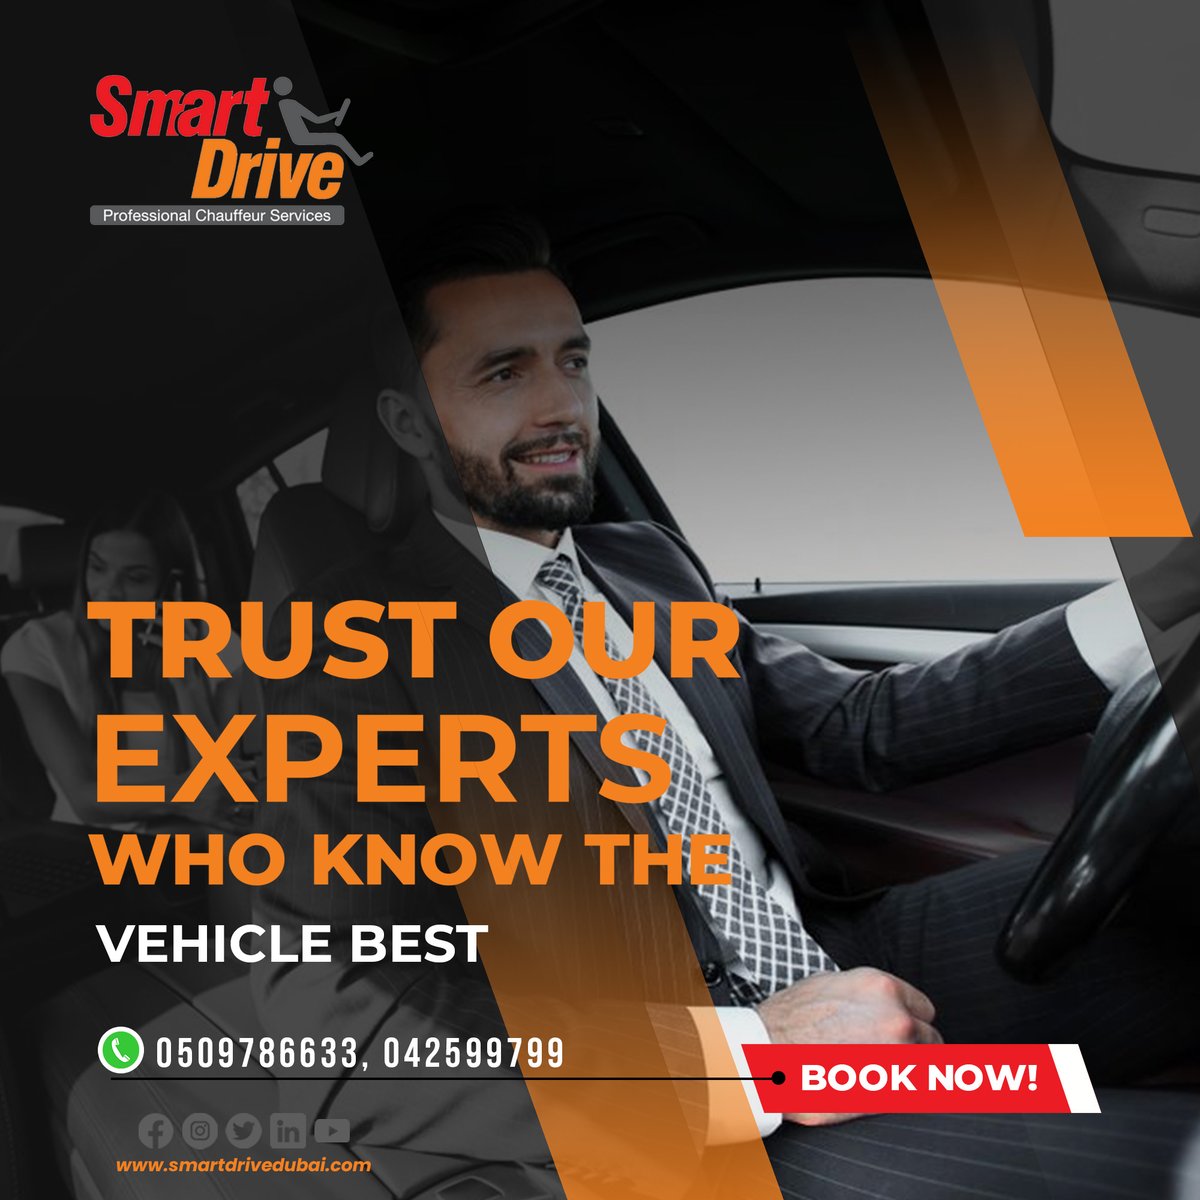 📷When it comes to your #vehicle, trust #ourexperts who know it best. With their #extensive knowledge and expertise, you can rest assured that your #ride is in capable hands.

Visit: smartdrivedubai.com
.
.
.
.
.
#SmartDriveDubai #DubaiDriving #SafeDrivingDubai #DrivingTips